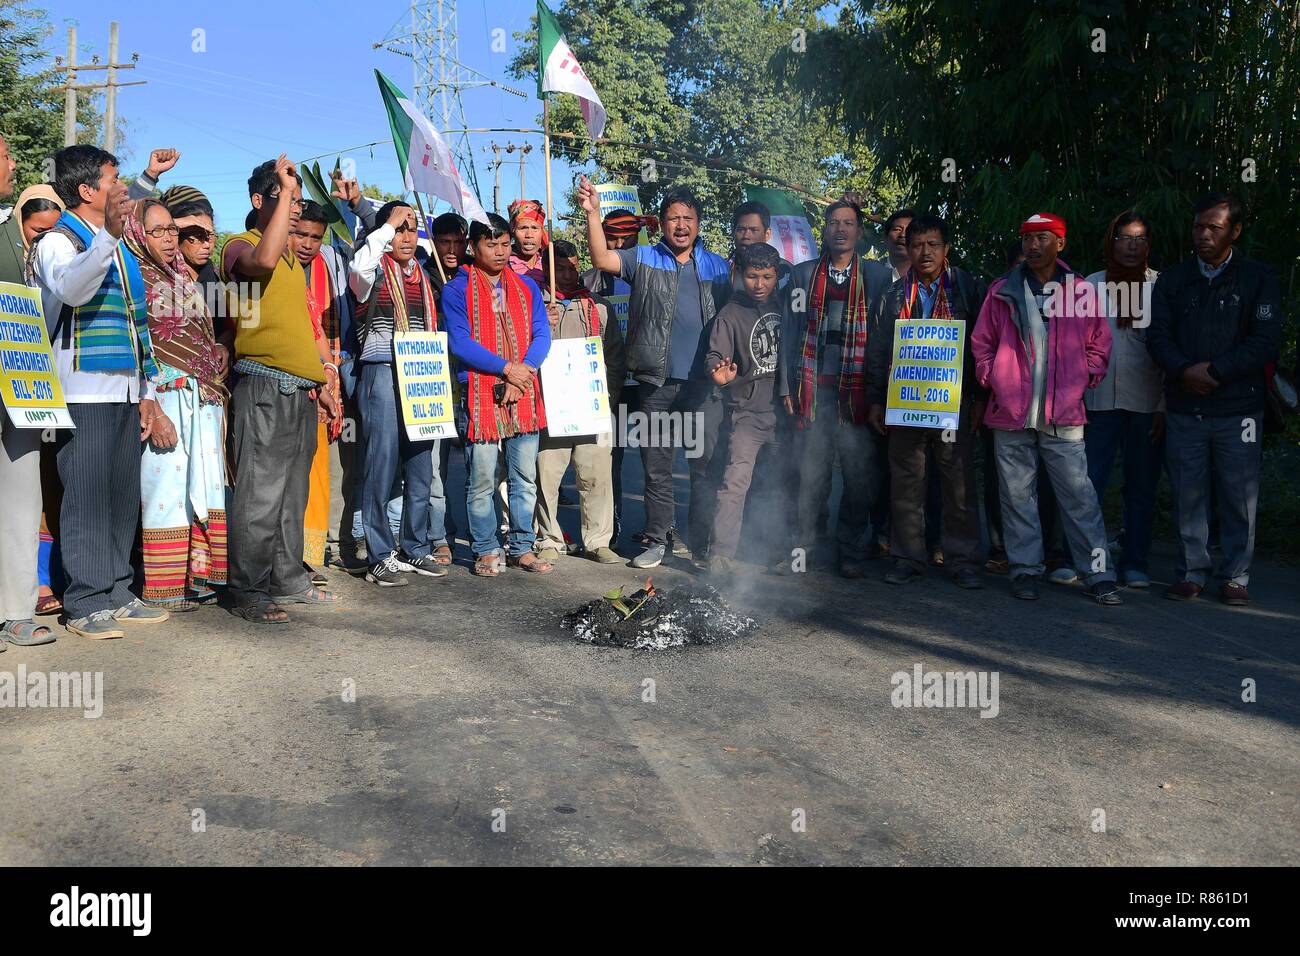 Agartala, Tripura, India. 10th Dec, 2018. Protesters are seen standing before the burning fire while chanting slogans during the protest.INPT (Indigenous Nationalist Party of Twipra) leaders and supporters protest on the National High way in Khamtingbari, 40 km far from Agartala city to demand for the withdrawal of Citizenship Bill that was Introduced in July 19 in Lok Sabha, the Citizenship Amendment Bill 2016 seeks to allow illegal migrants from certain minority communities in Afghanistan, Bangladesh and Pakistan eligible for Indian citizenship. In other words, it amends the Citizenshi Stock Photo